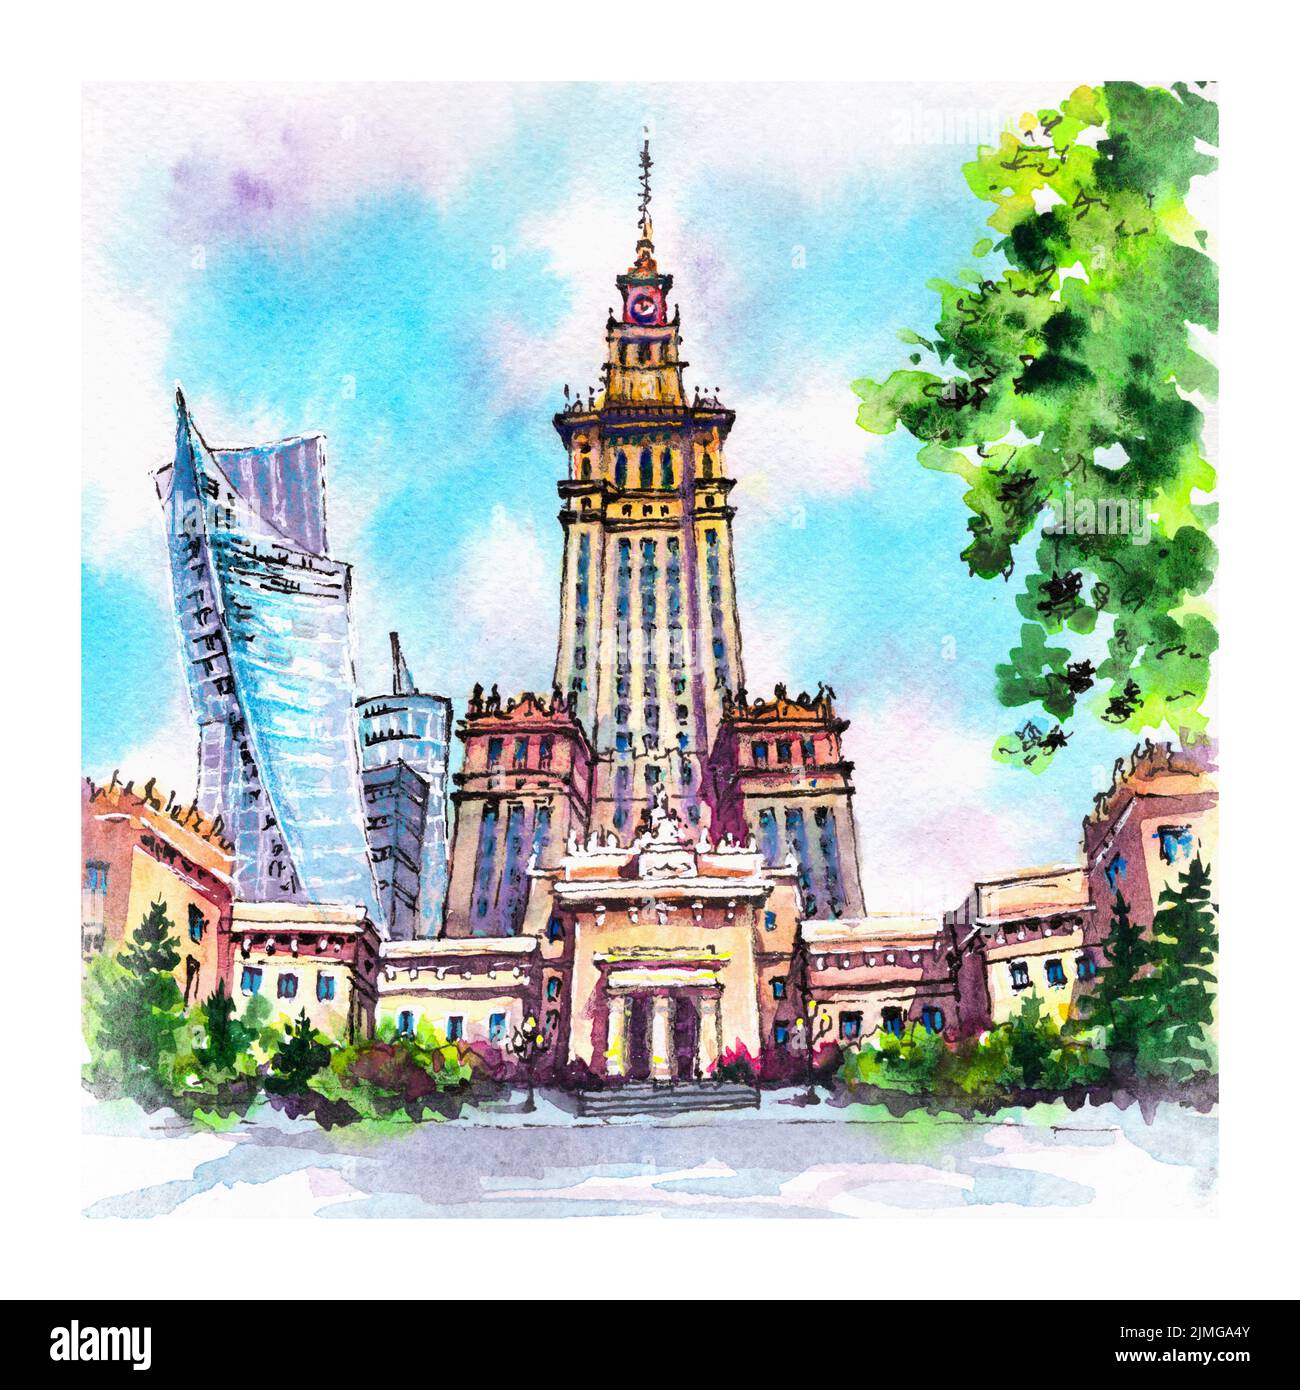 Watercolor sketch of Palace of Culture and Science in Warsaw, Poland. Stock Photo